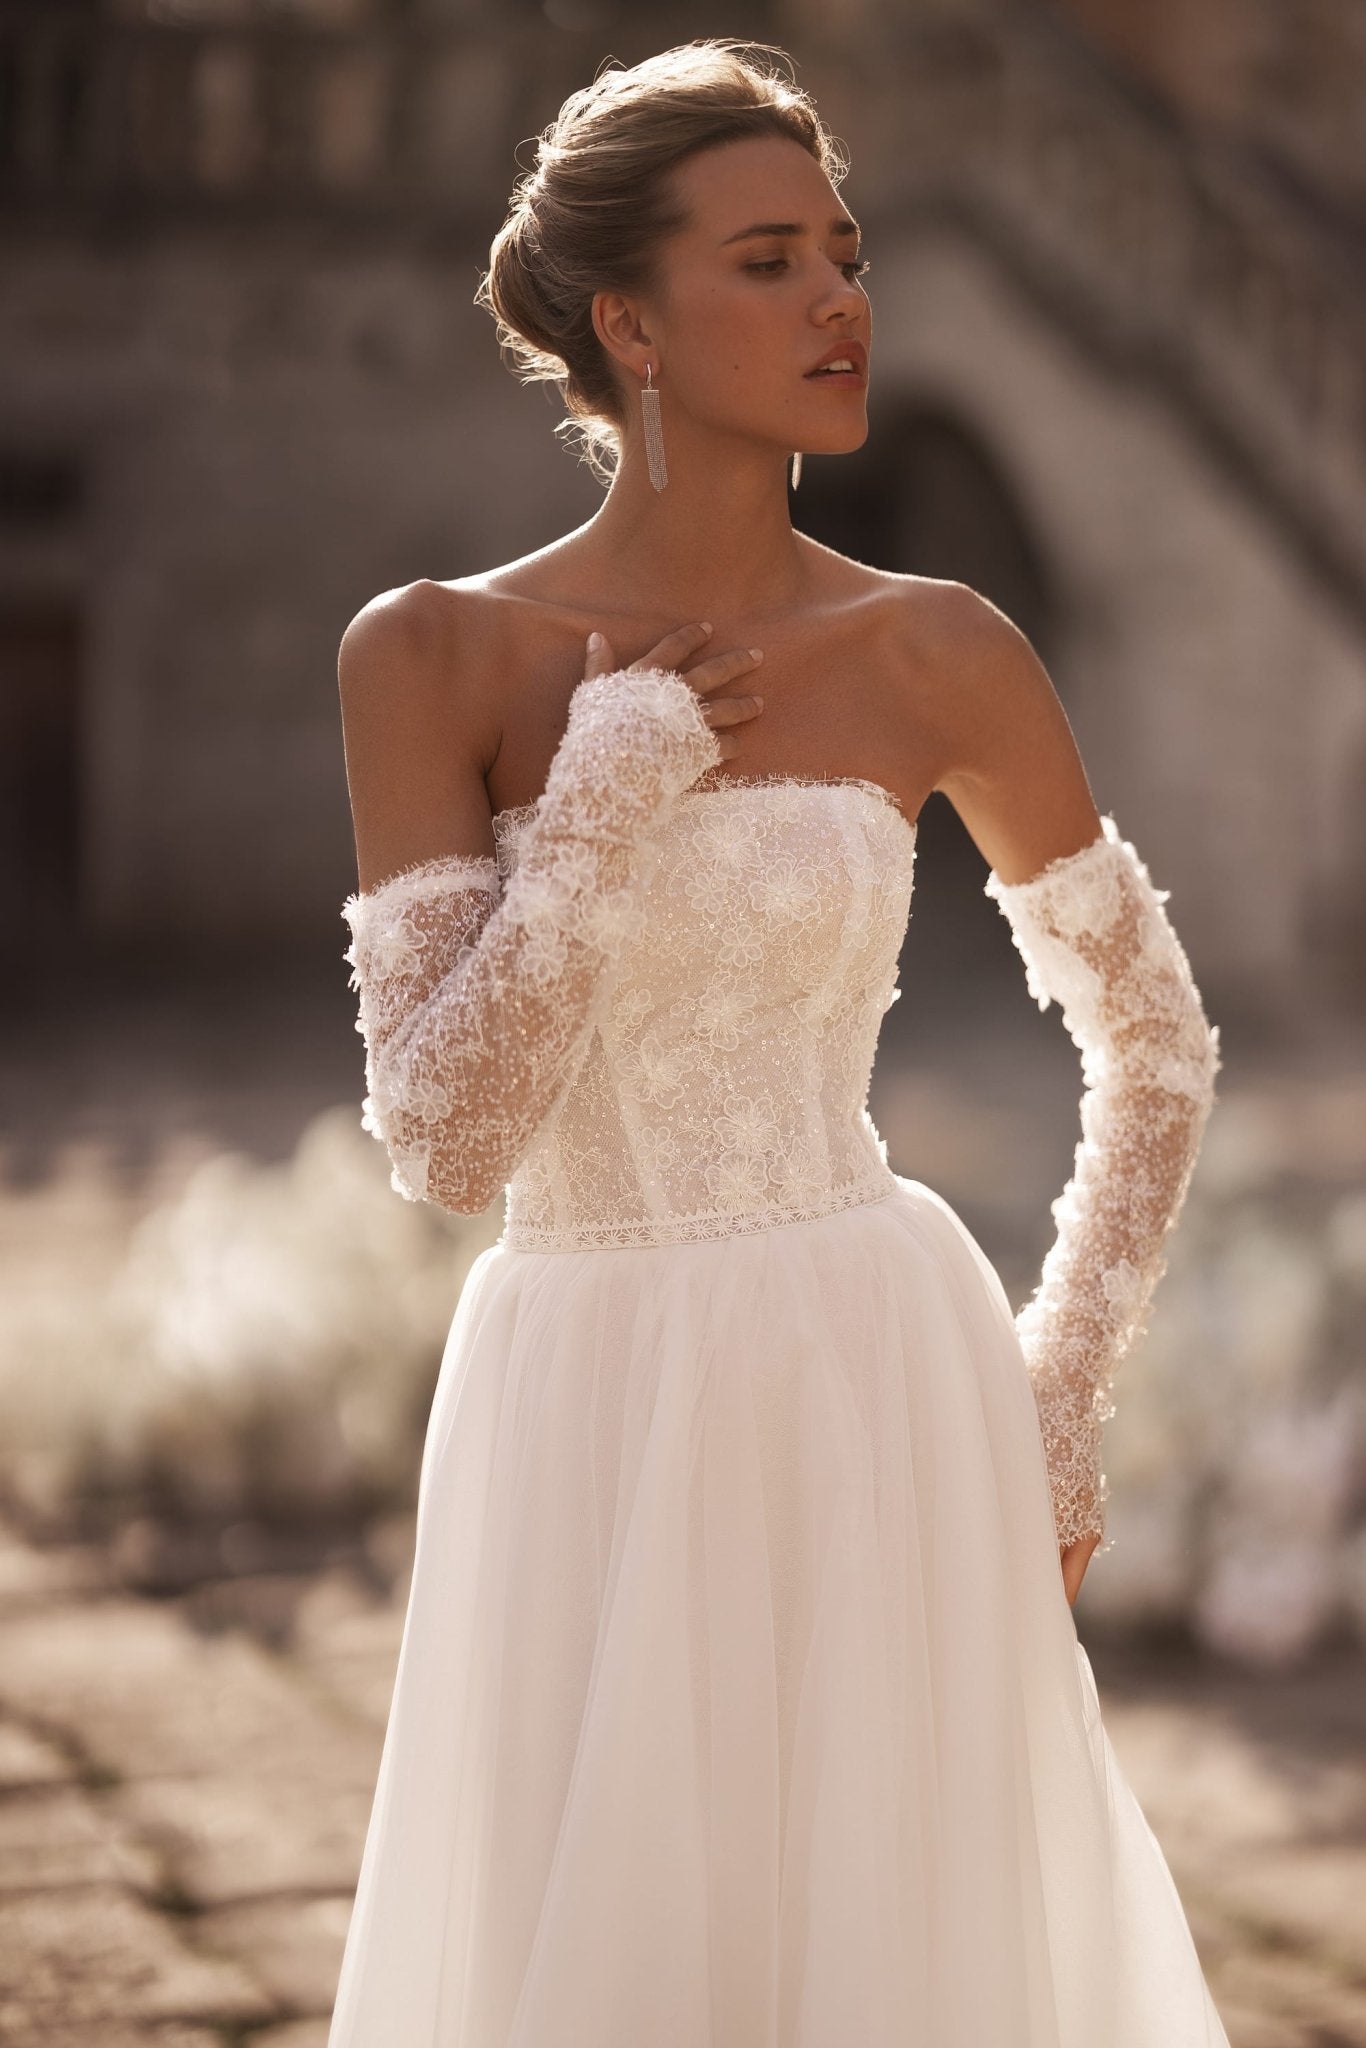 Ivory A-Line Bridal Gown with Embellished Corset and Seamless Skirt Flow Plus Size - WonderlandByLilian